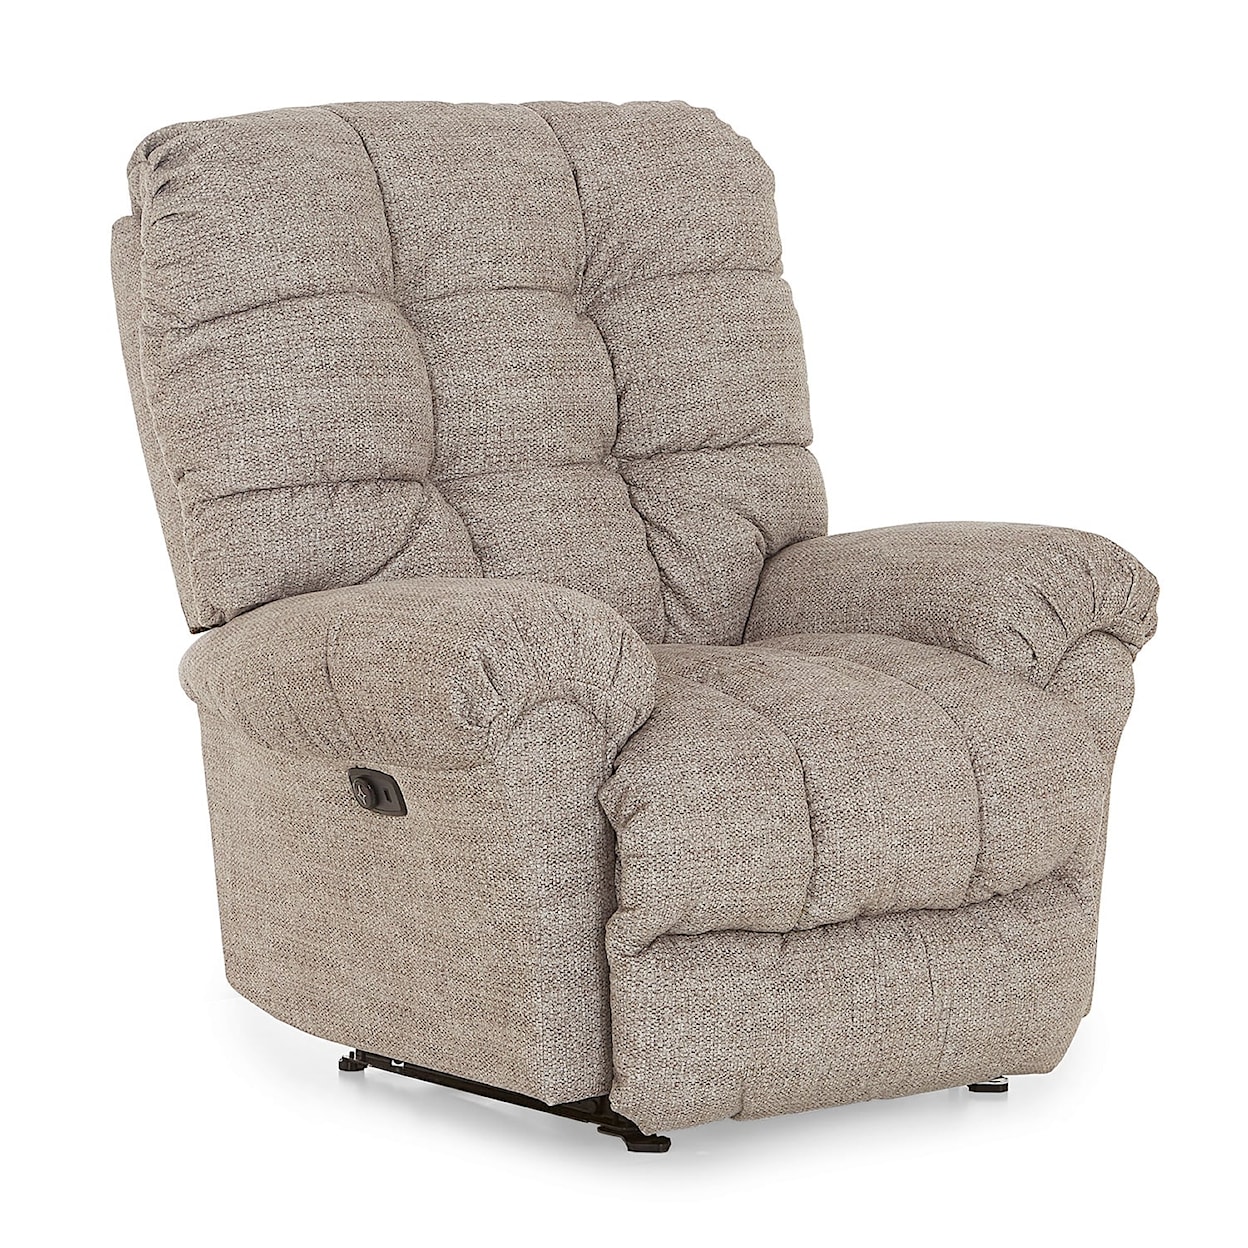 Best Home Furnishings Corey Space Saver Recliner